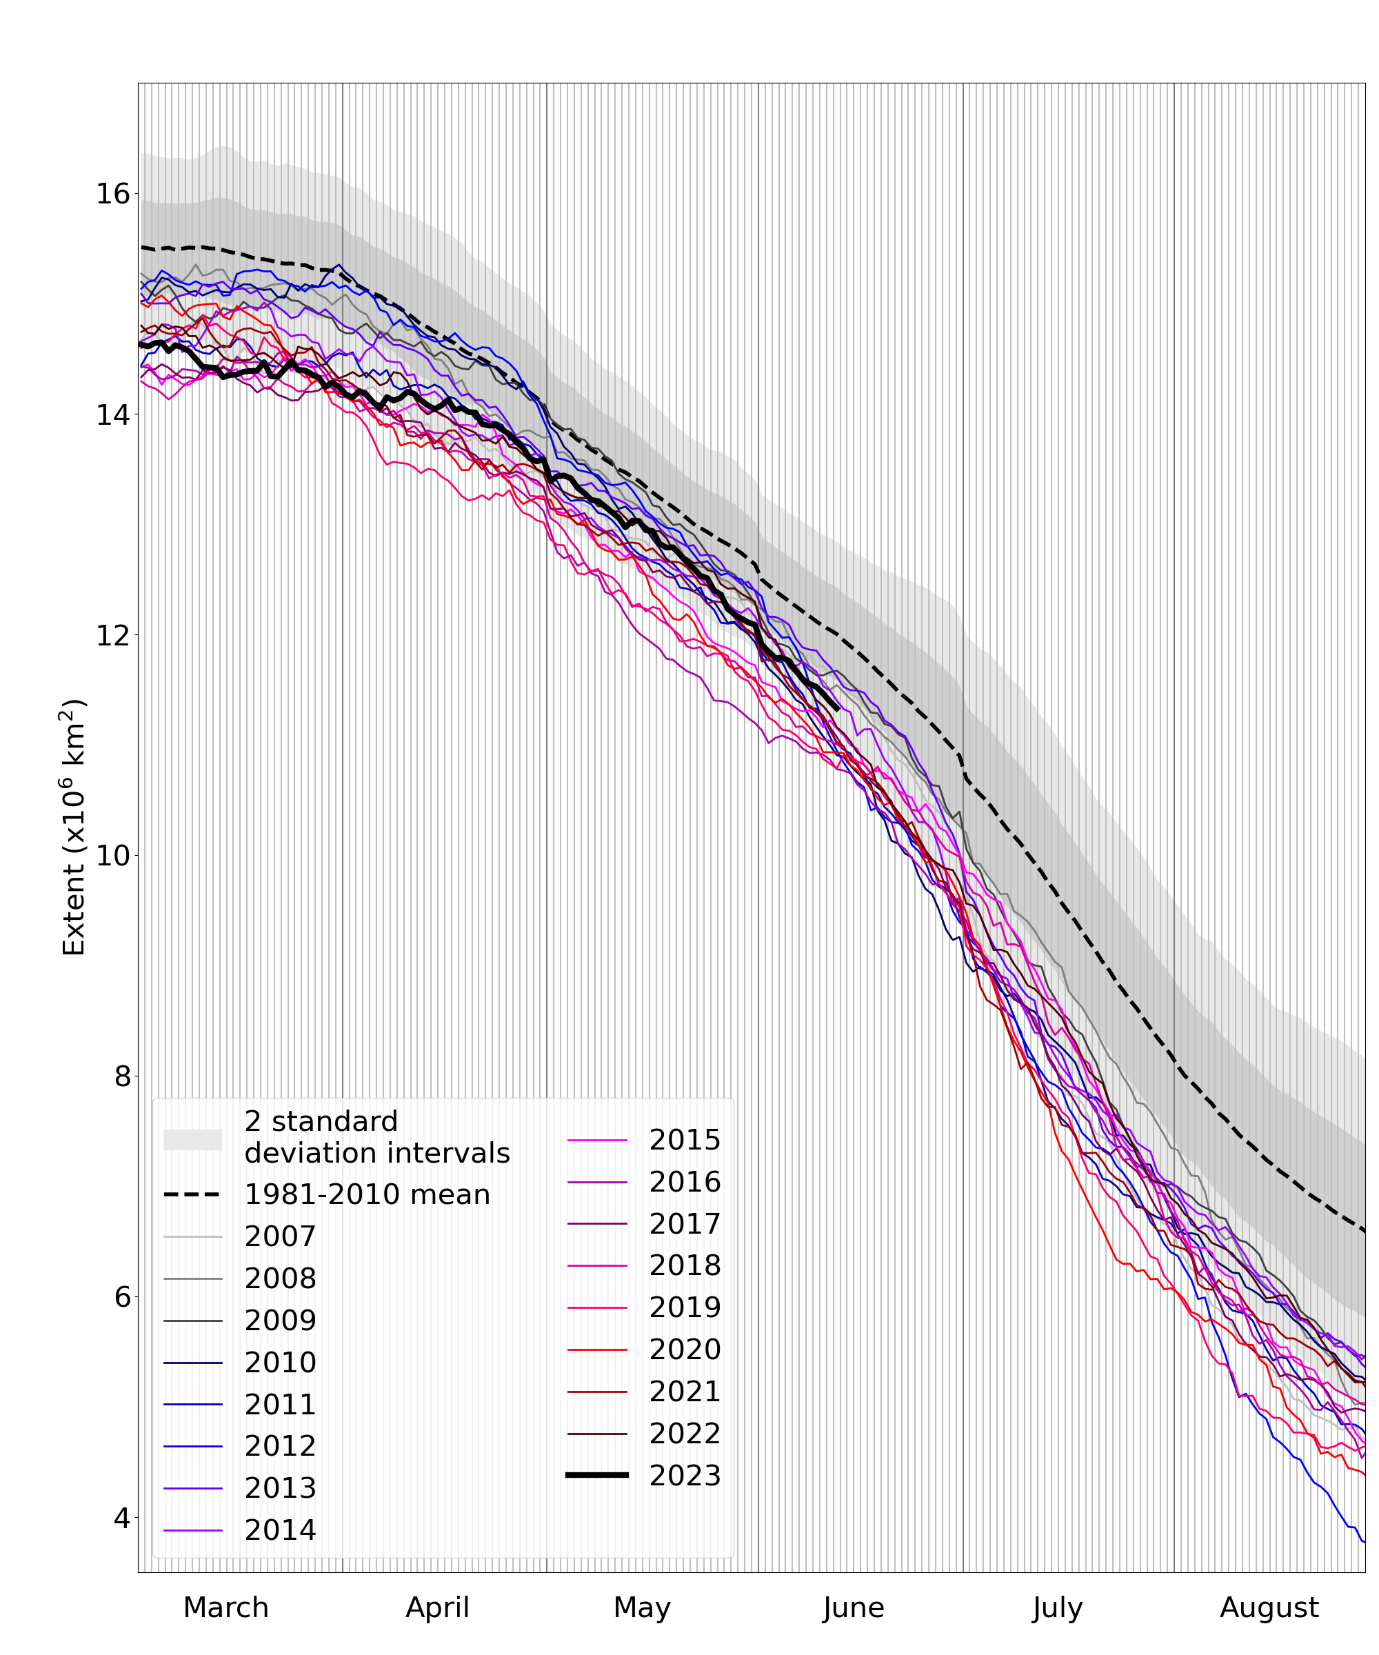 Daily Arctic sea ice extent for 2023, compared with recent years and the 1981-2010 average with ± 1 and 2 standard deviation intervals indicated by shaded areas.